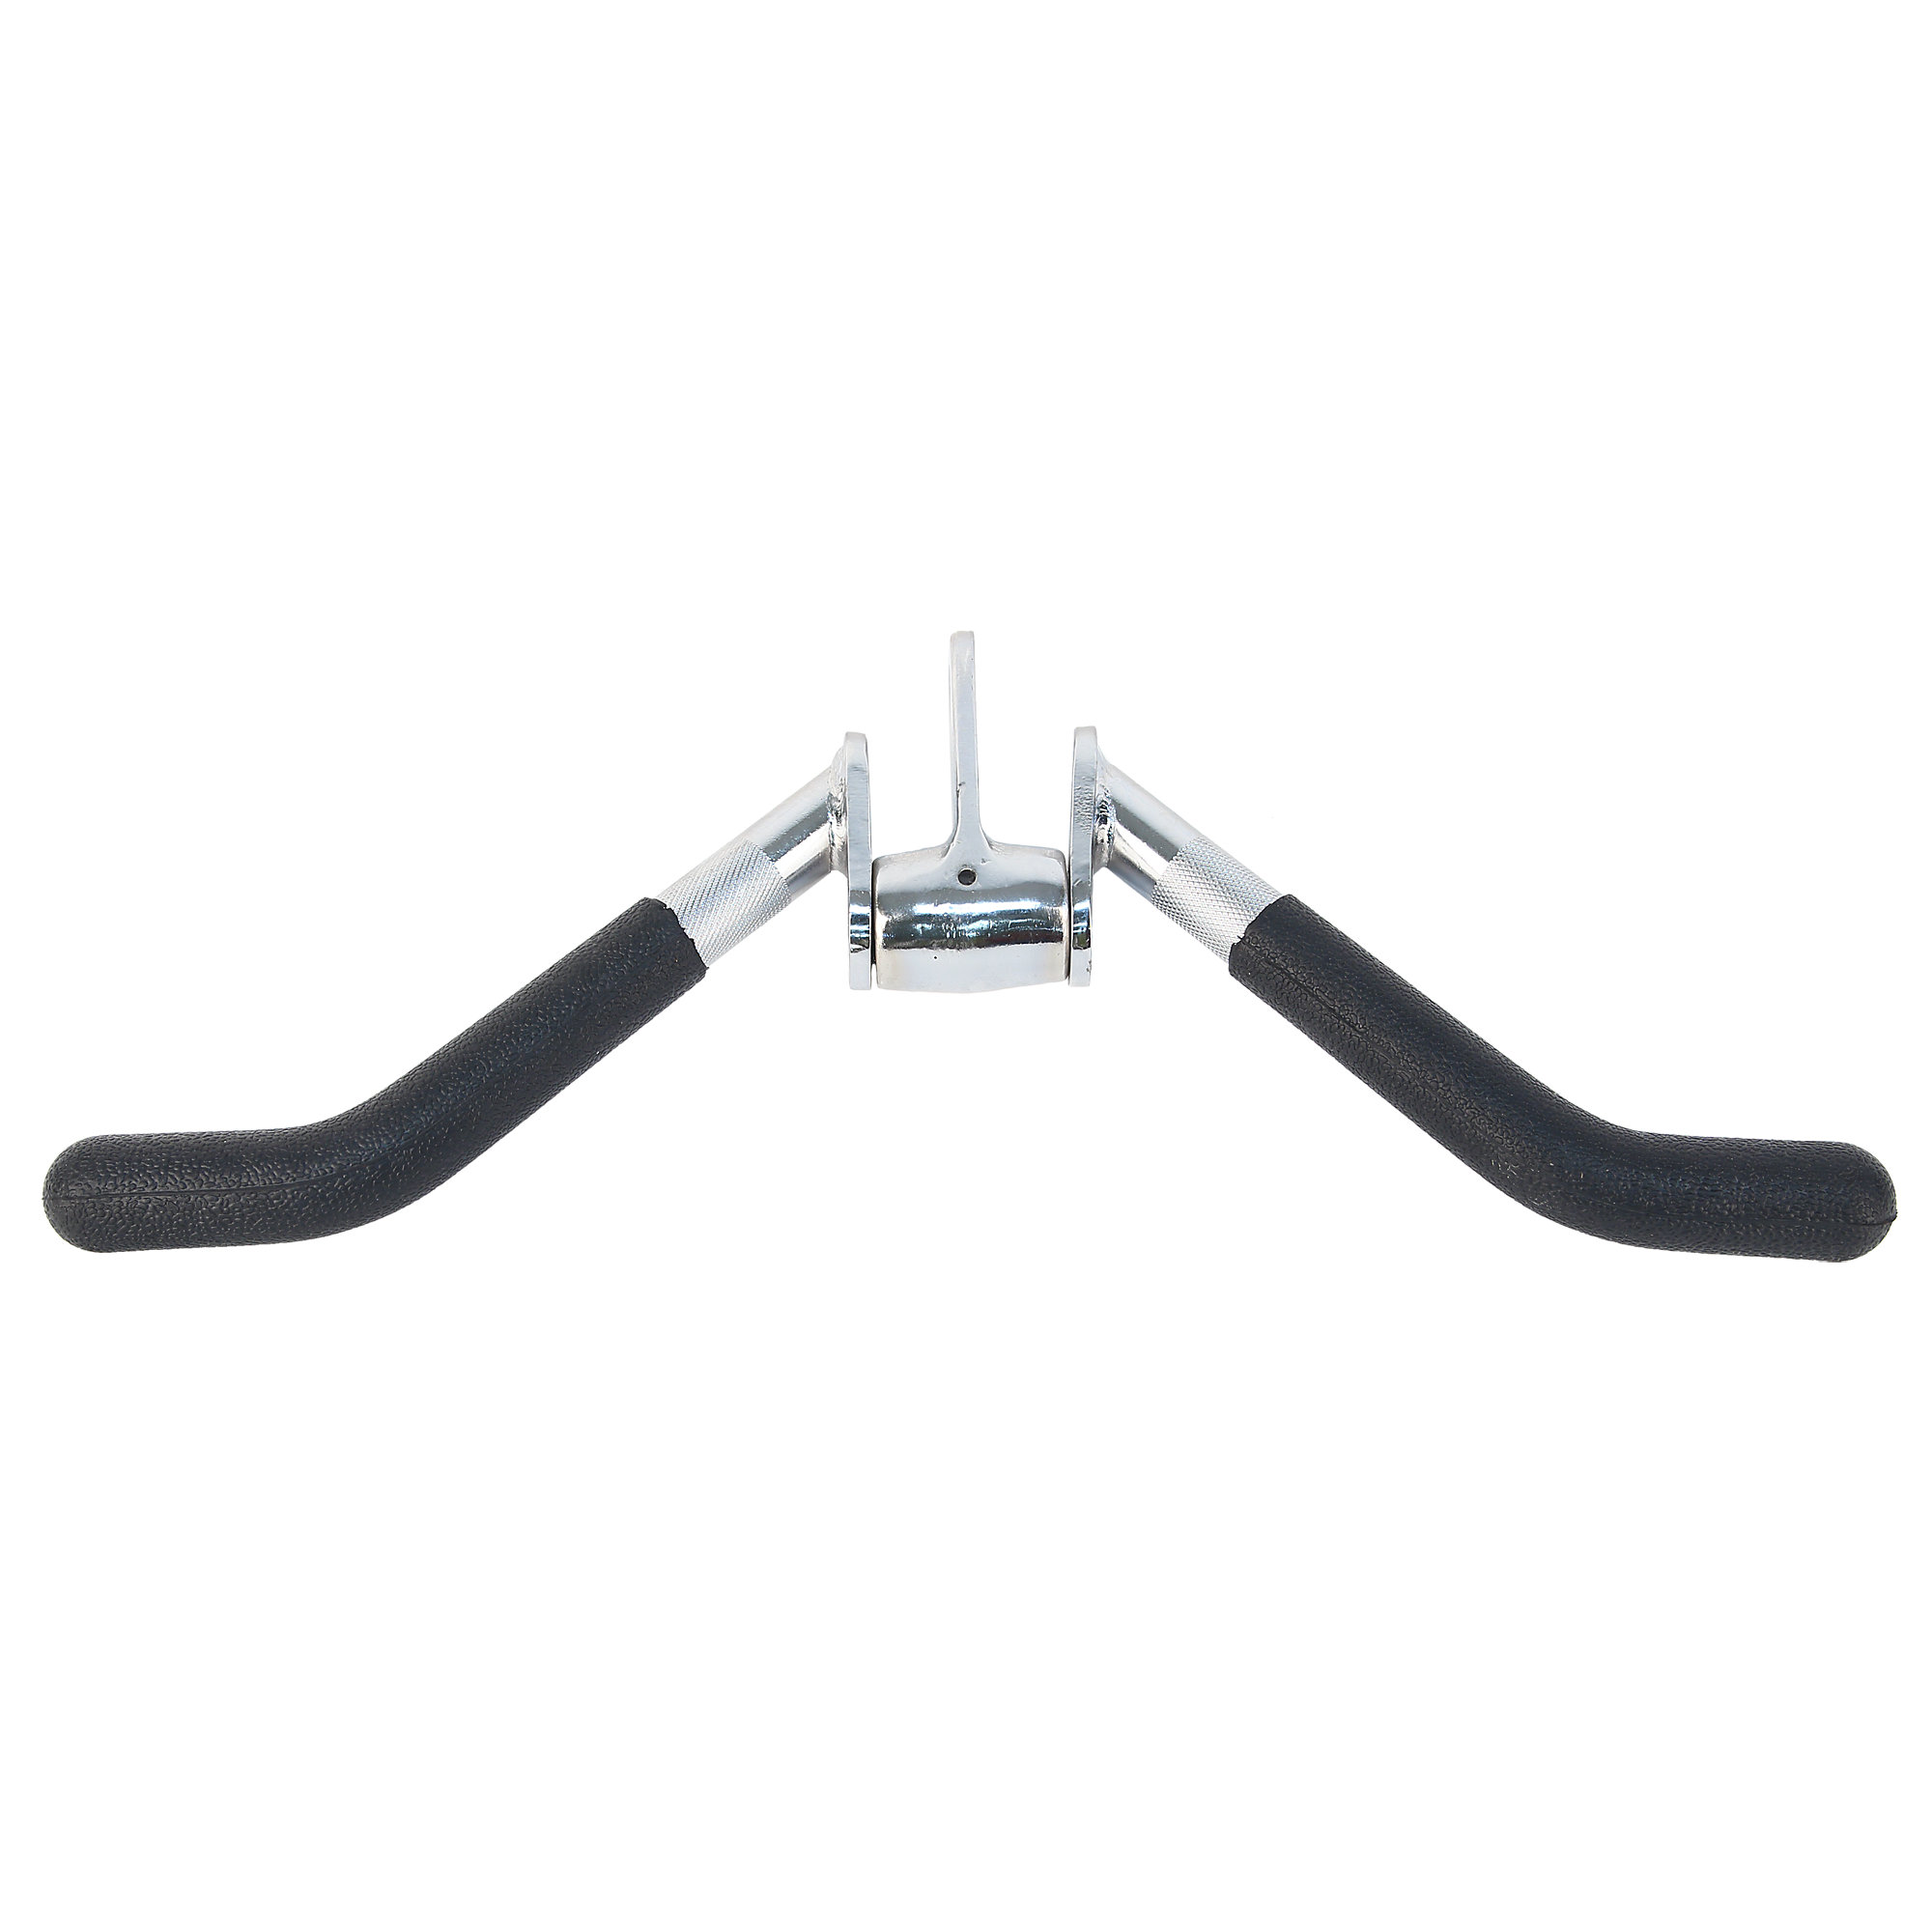 V-Bar Revolving Triceps Press-Down Bar with Rubber Grips